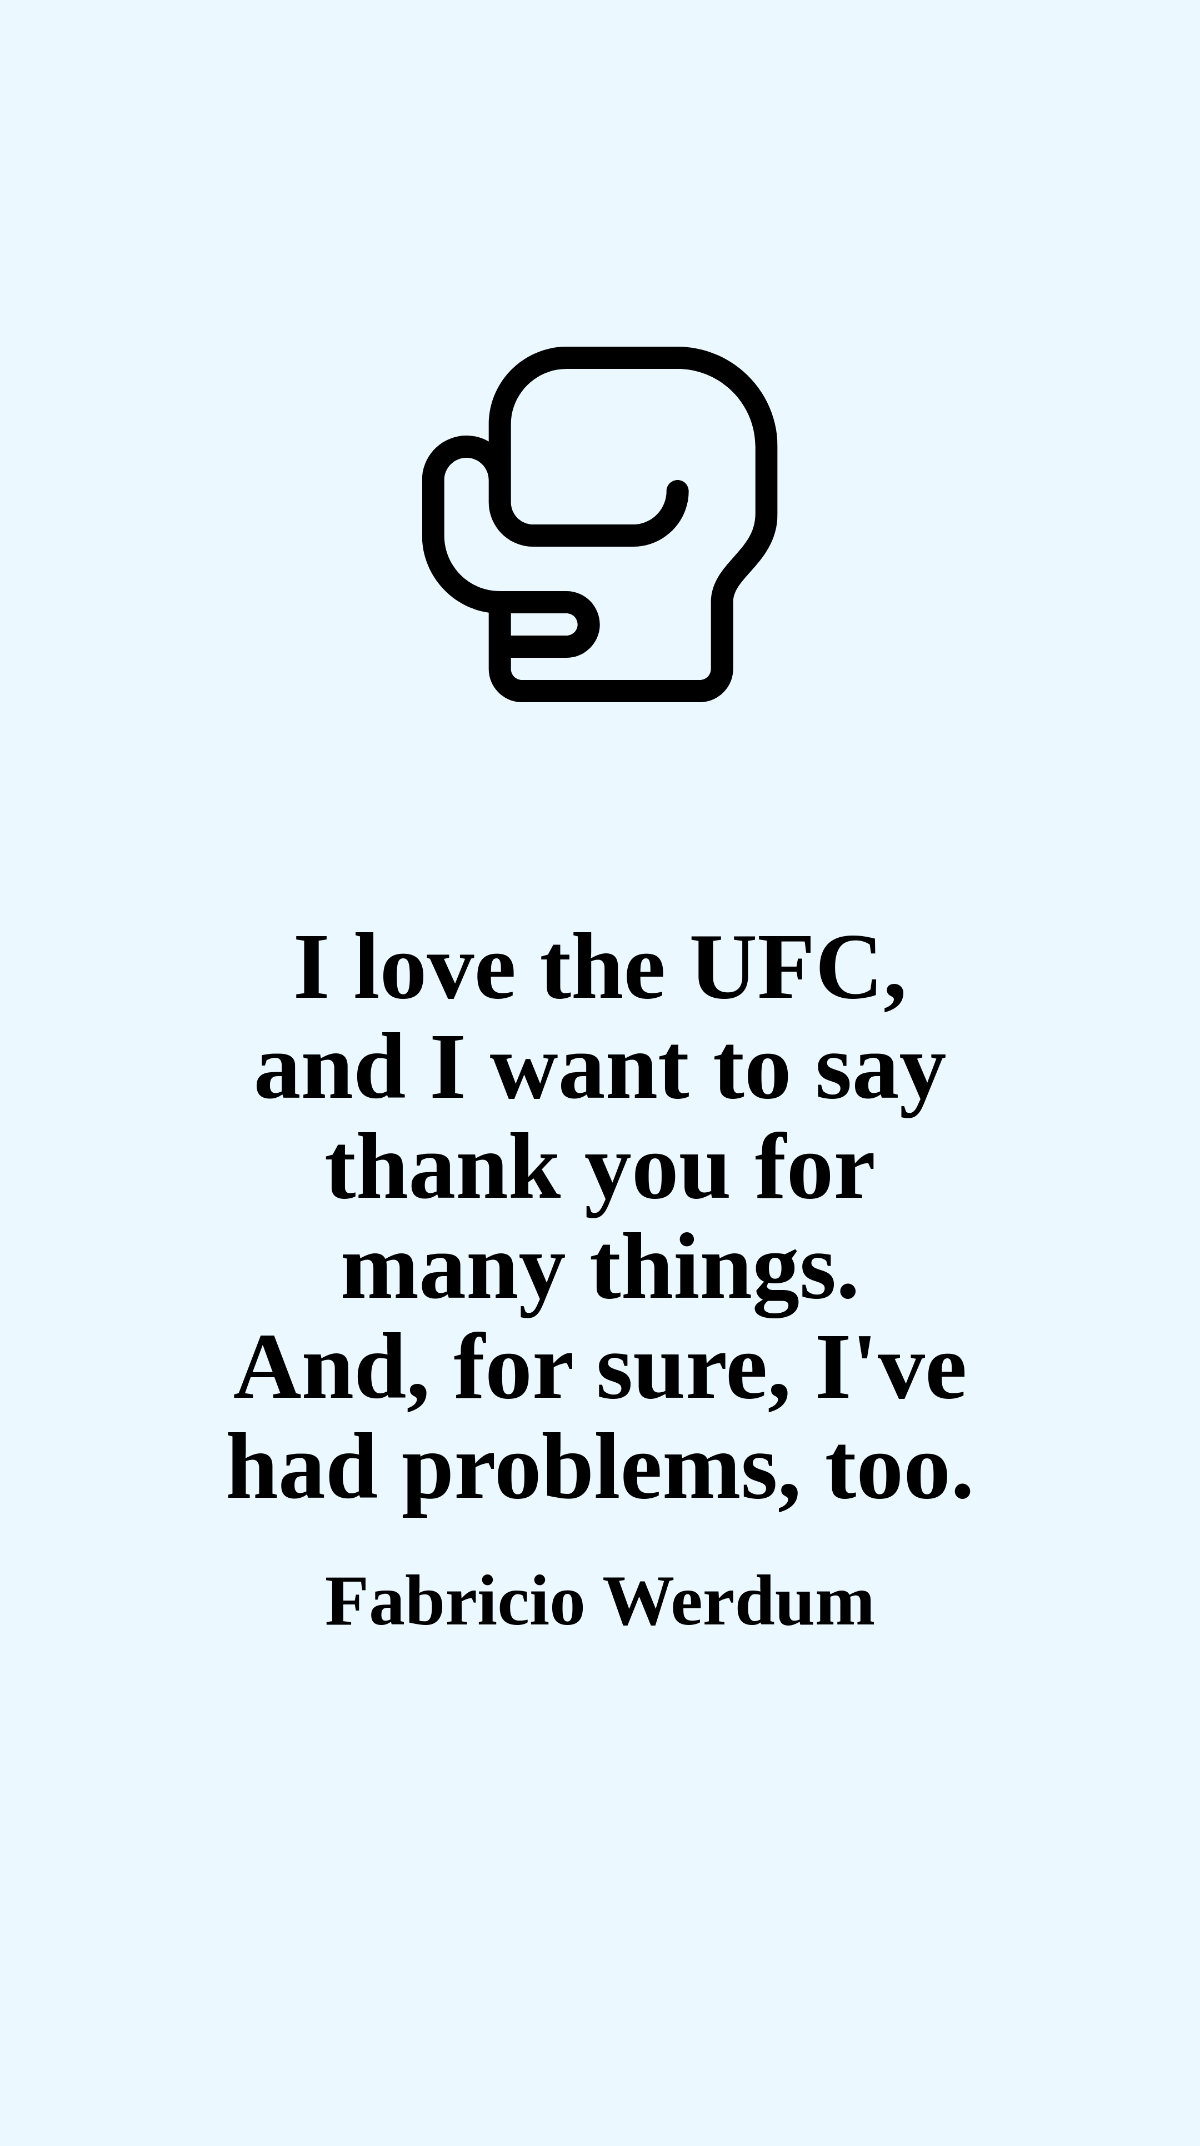 Free Fabricio Werdum - I love the UFC, and I want to say thank you for many things. And, for sure, I've had problems, too. Template